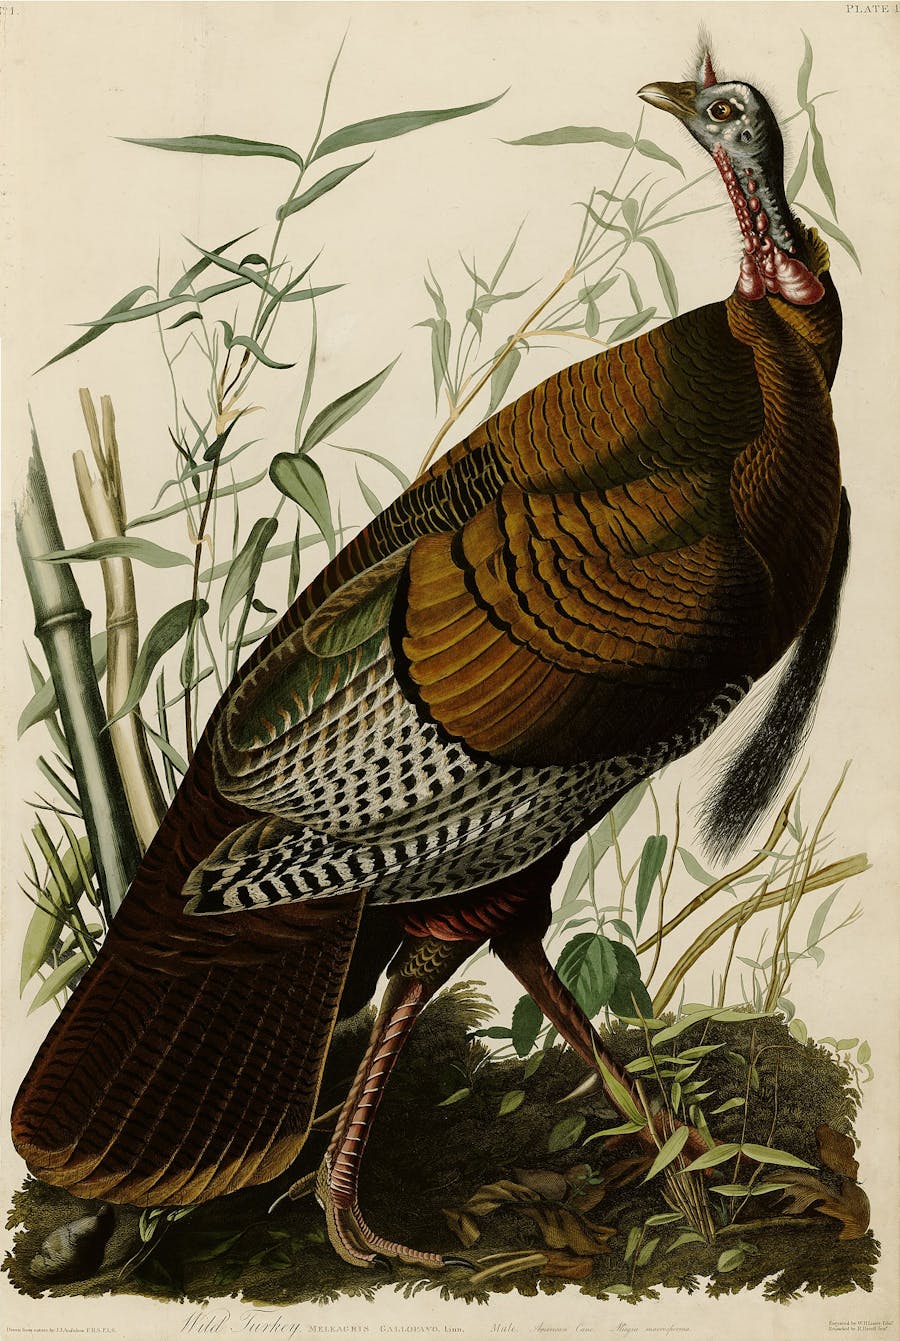 Plate 1 of The Birds of America by Audubon depicting a wild turkey. Photo public domain